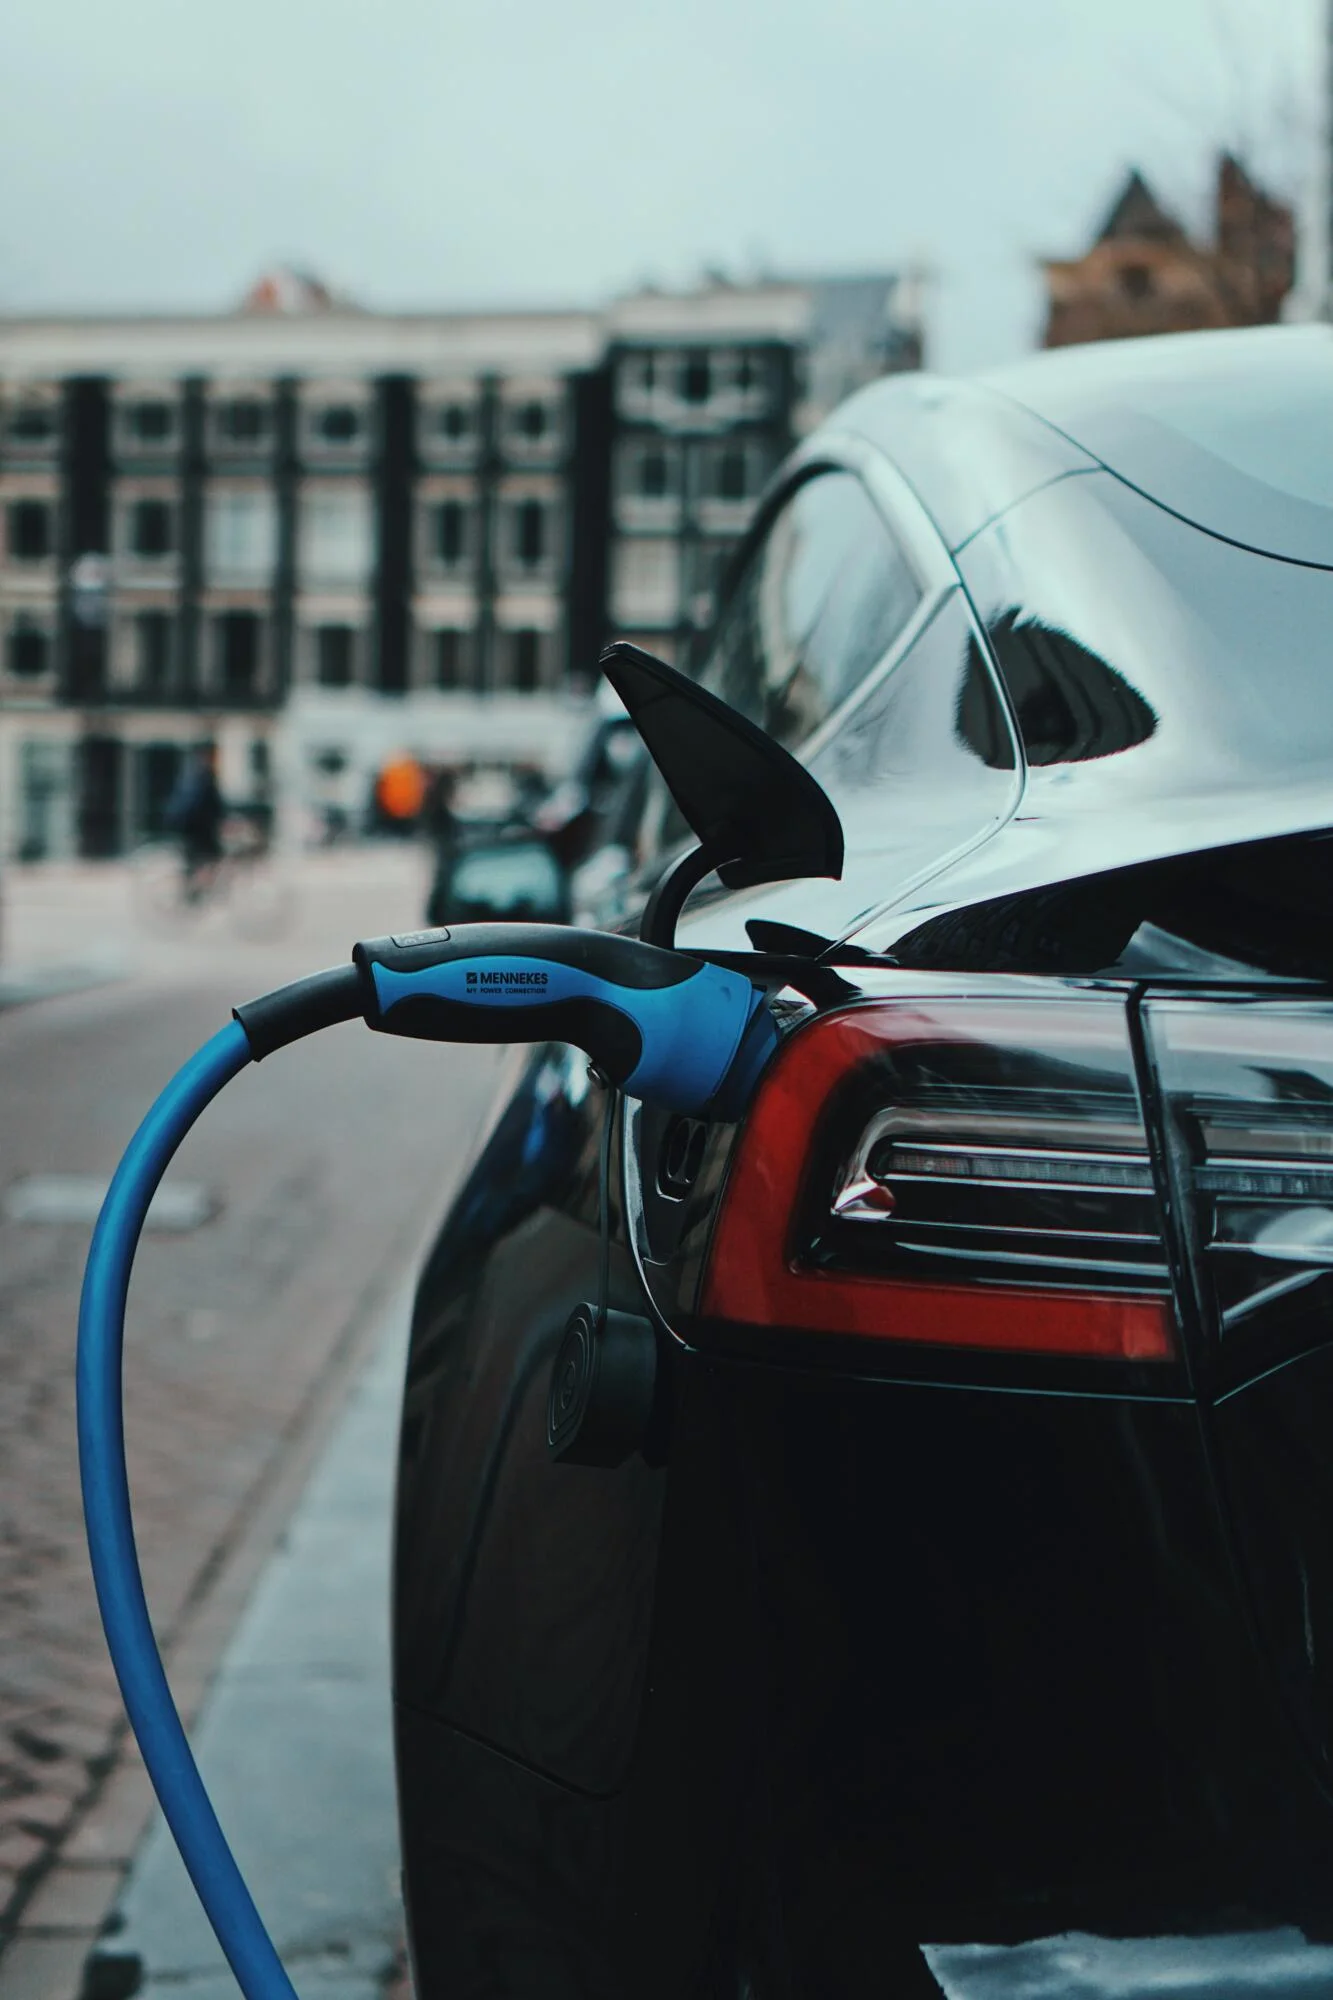 The Platform for Electromobility’s latest report confirms the inevitability of Electric vehicles transition